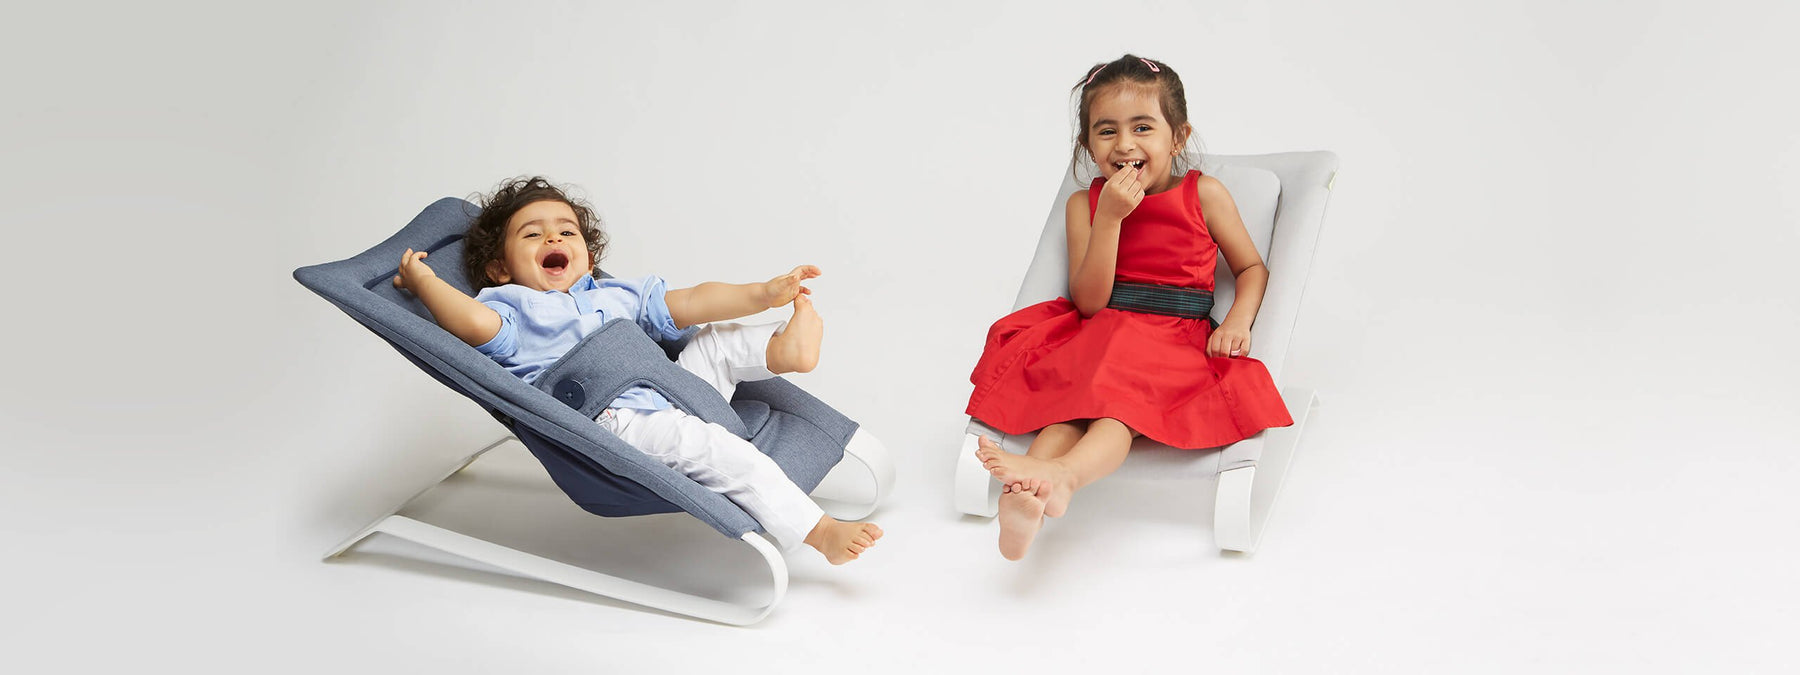 Bombol baby bouncer with kids